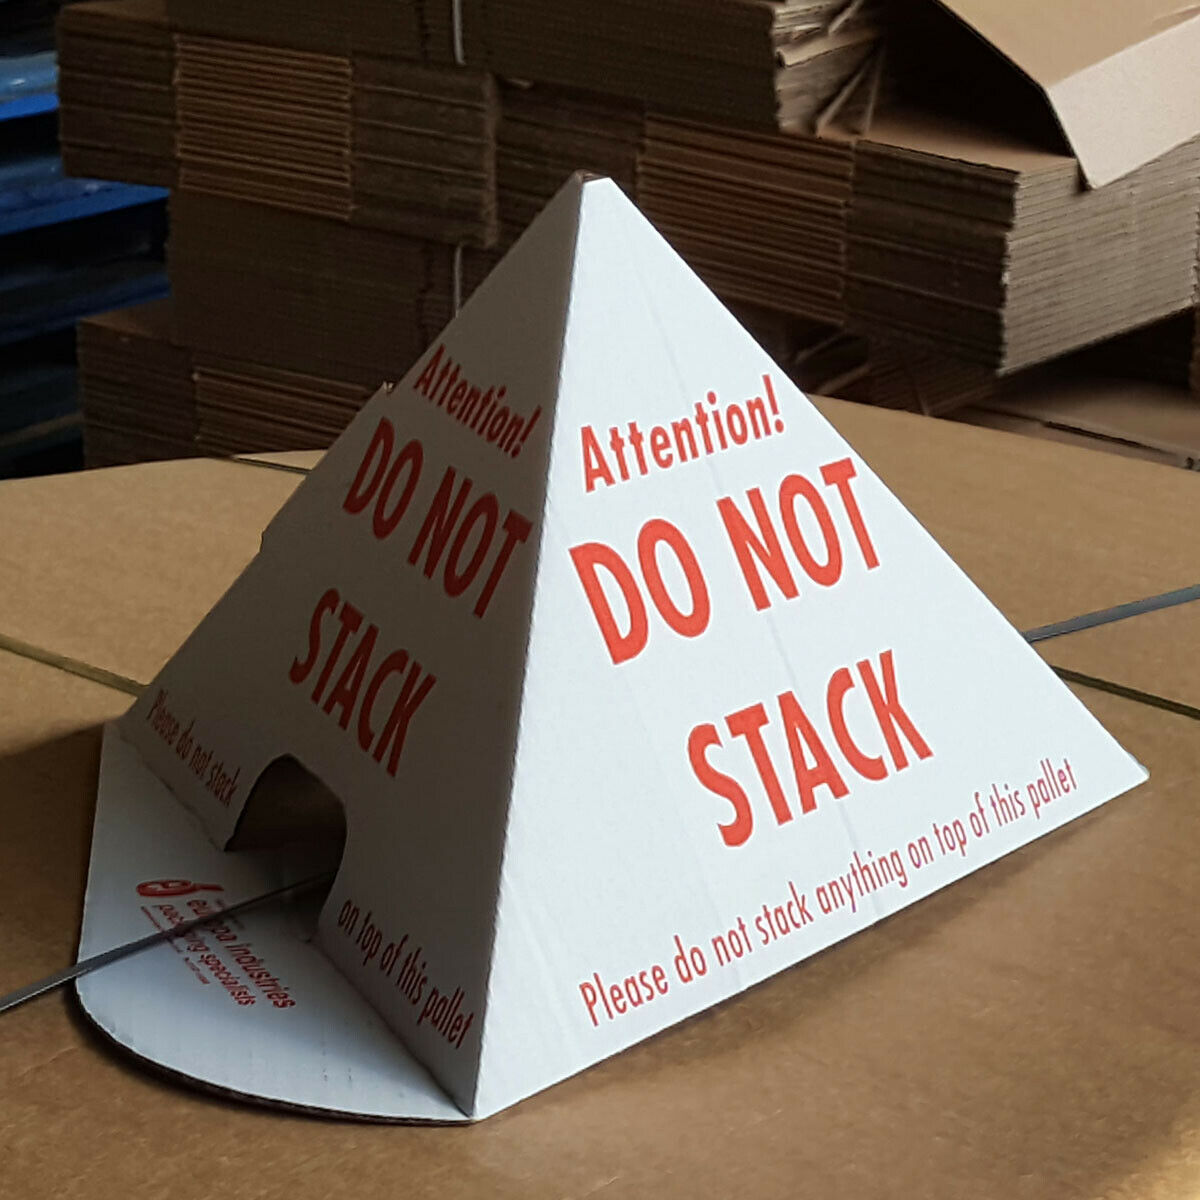 25 x DO NOT STACK Printed Cardboard Pallet Cones Corners Triangles Guards 24HRS 